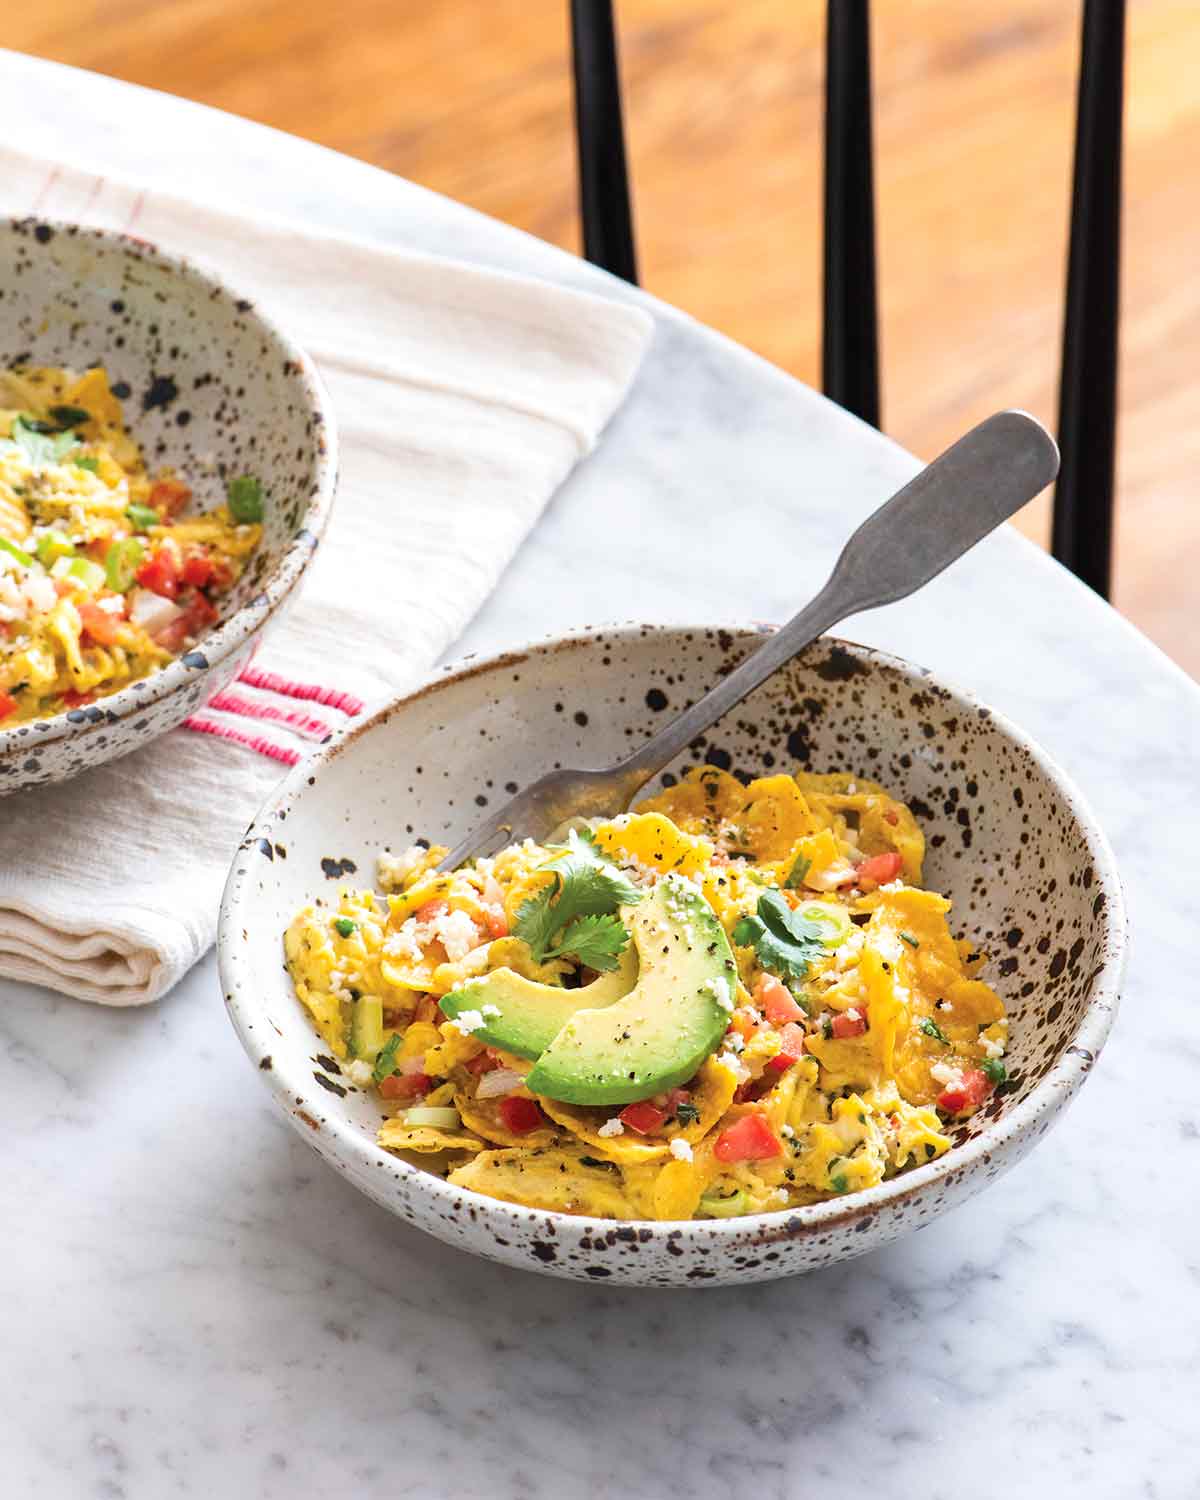 Tex-Mex migas topped with avocado in a white and blue bowl with a fork, beside a second bowl sitting on a tea towel.